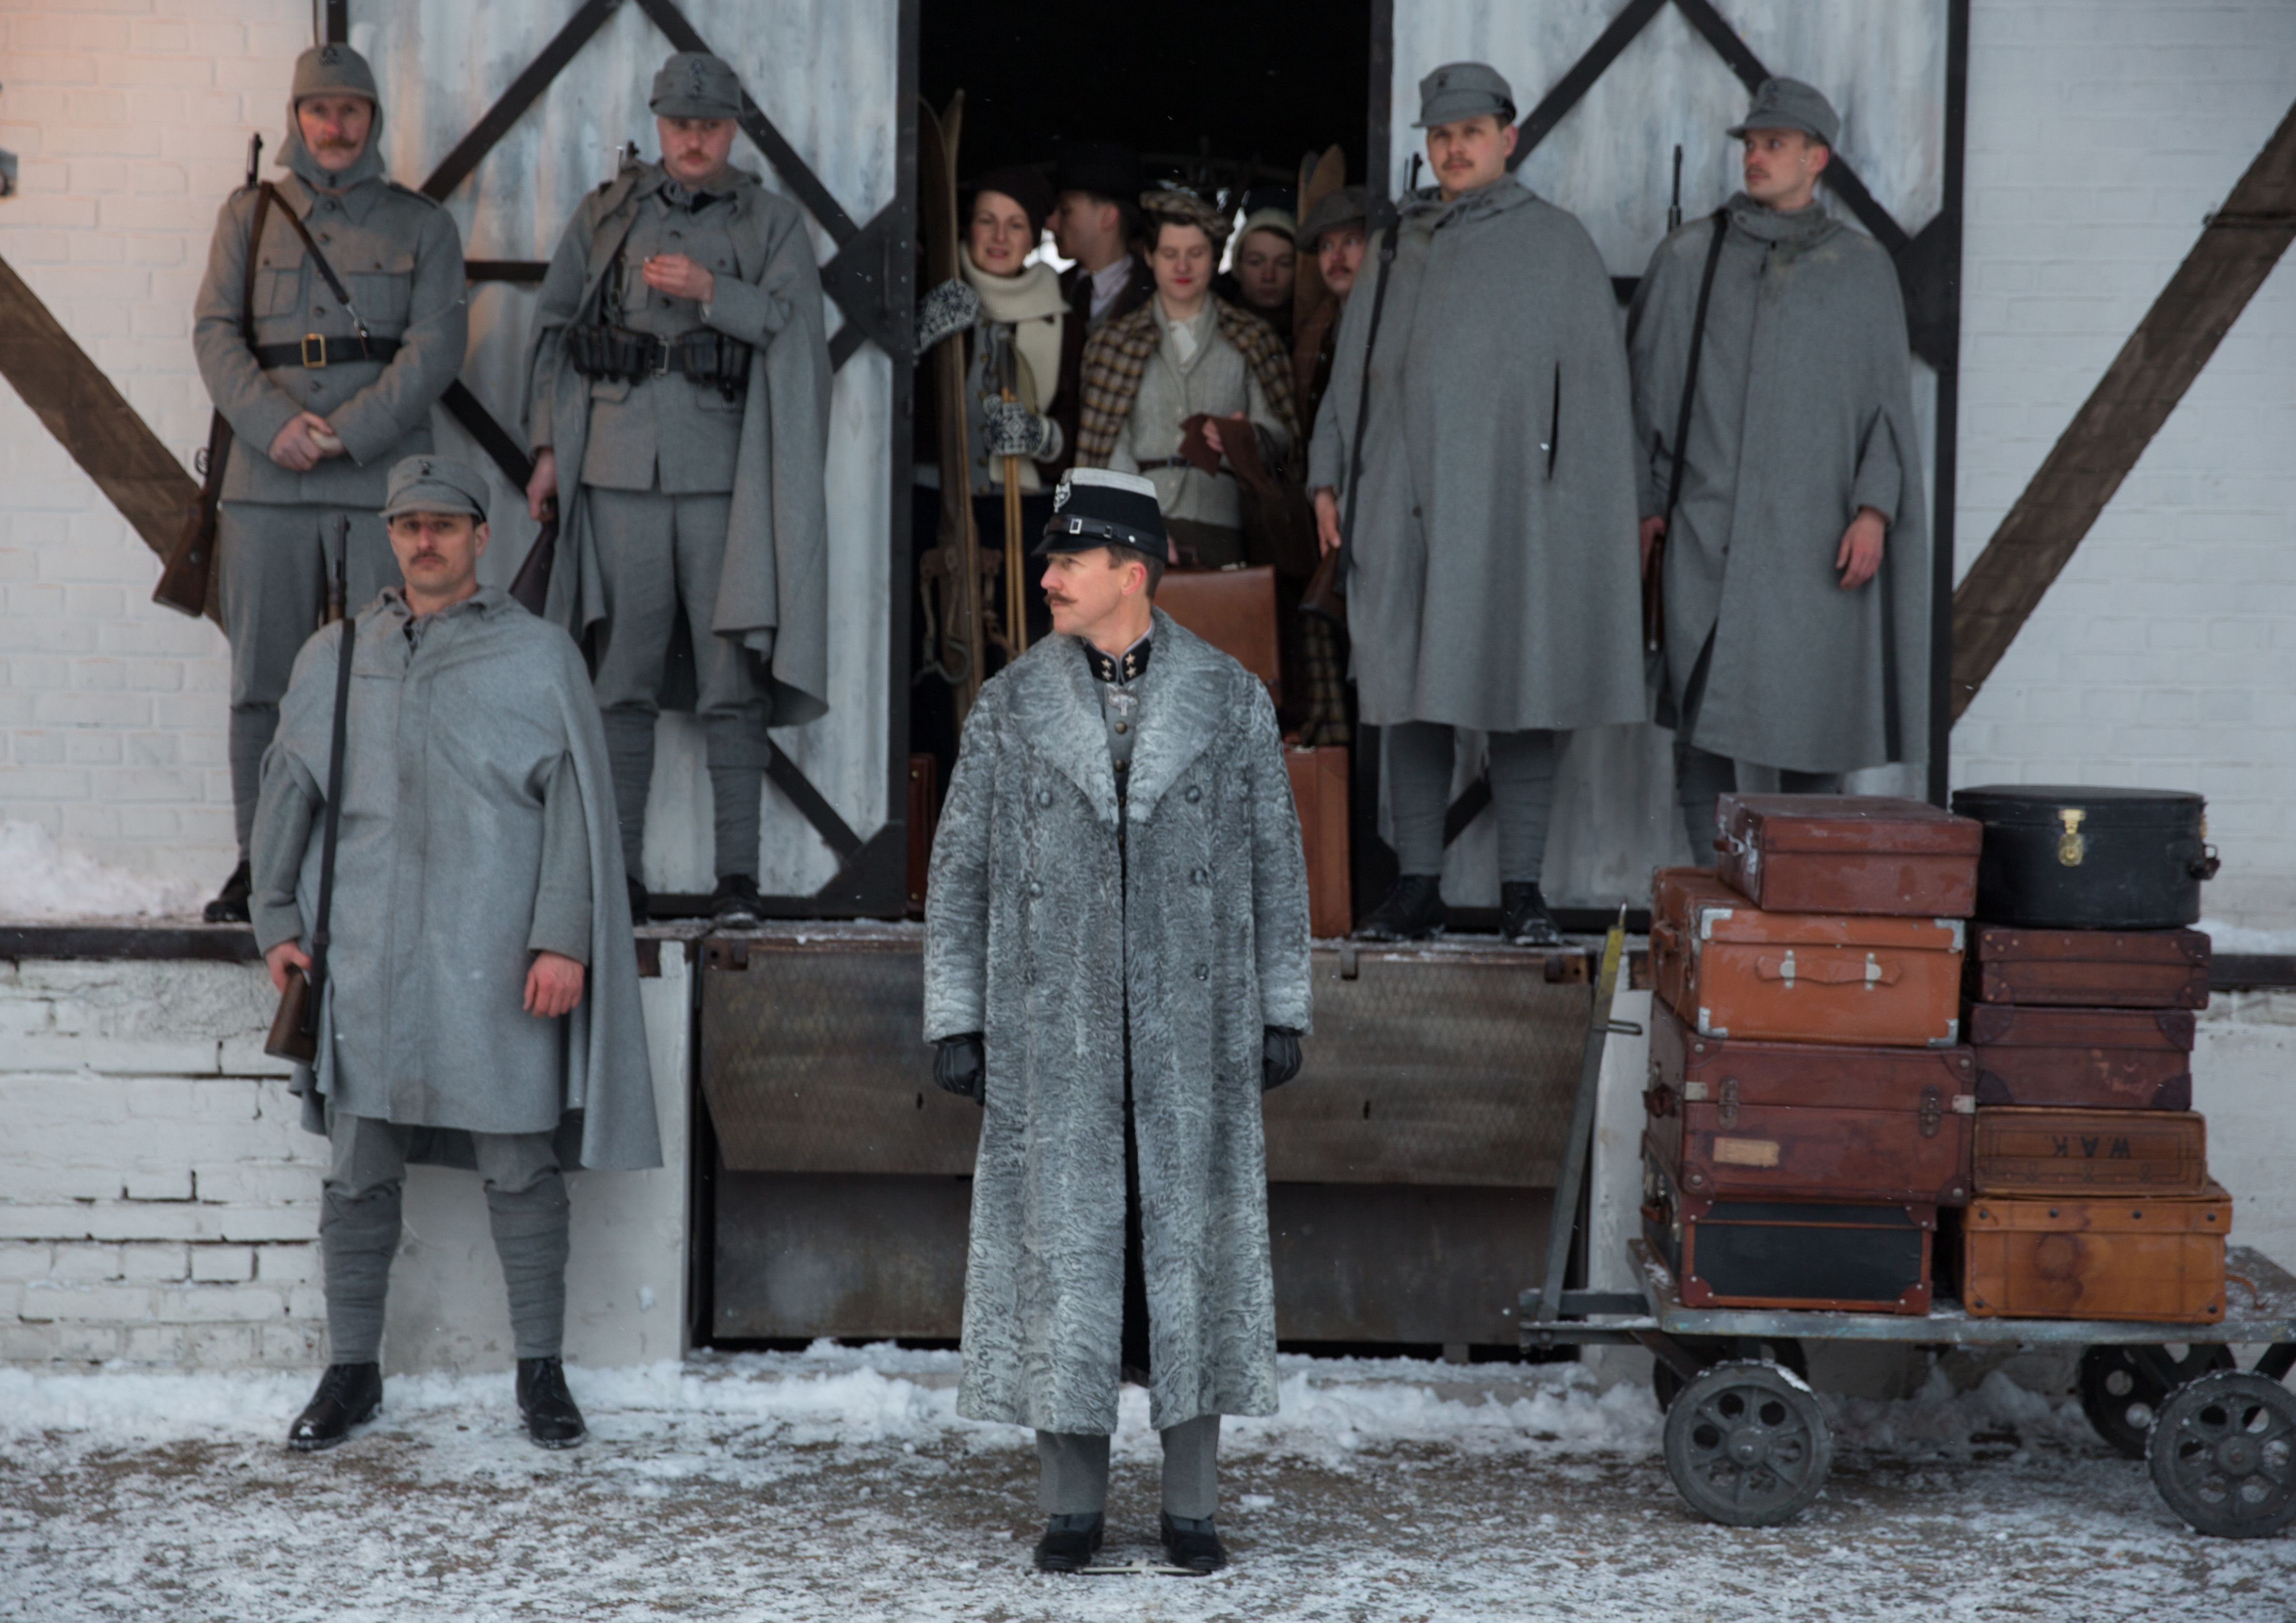 Edward Norton and his men in The Grand Budapest Hotel